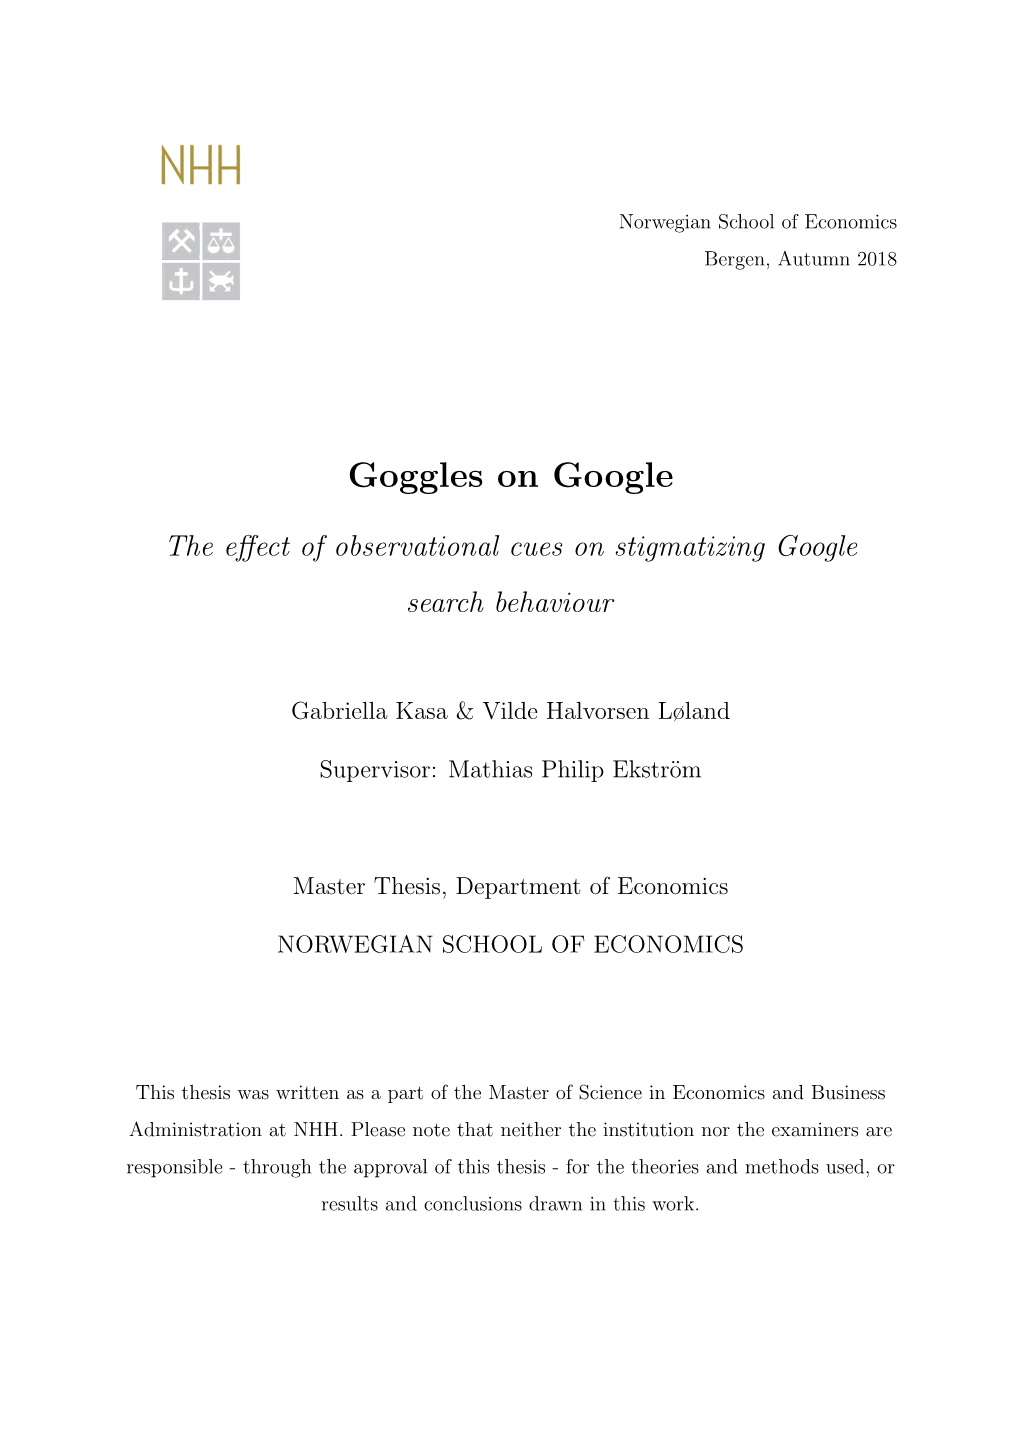 The Effect of Observational Cues on Stigmatizing Google Search Behaviour